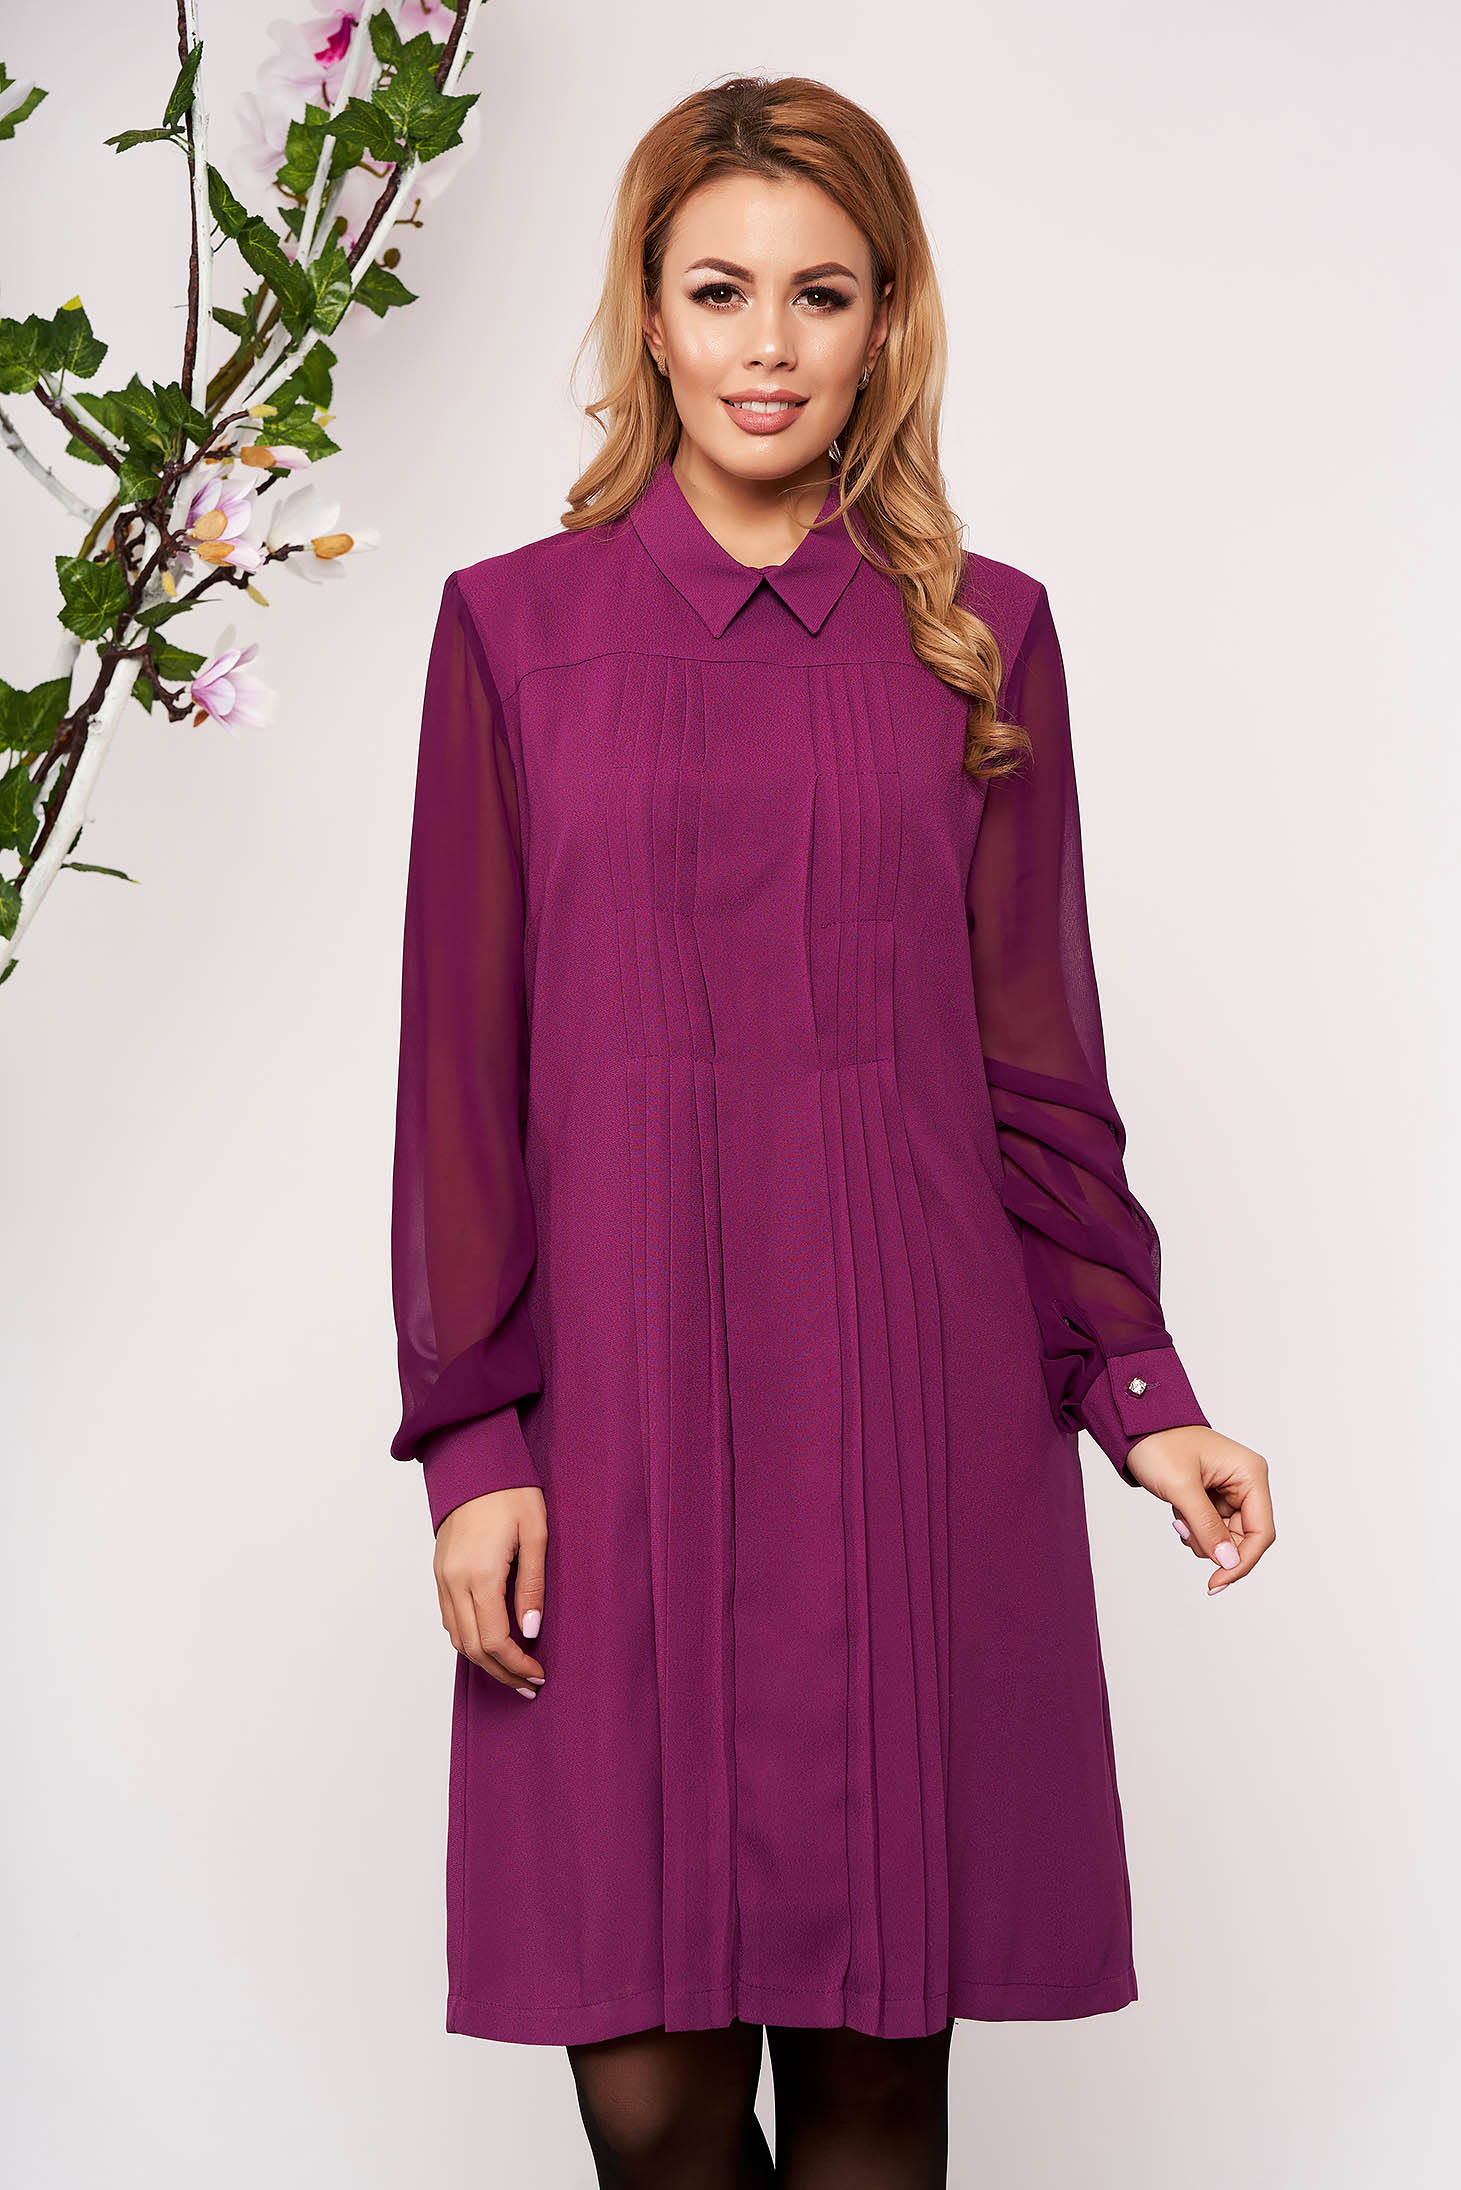 Purple dress occasional a-line midi with collar cloth long sleeve with pockets transparent sleeves